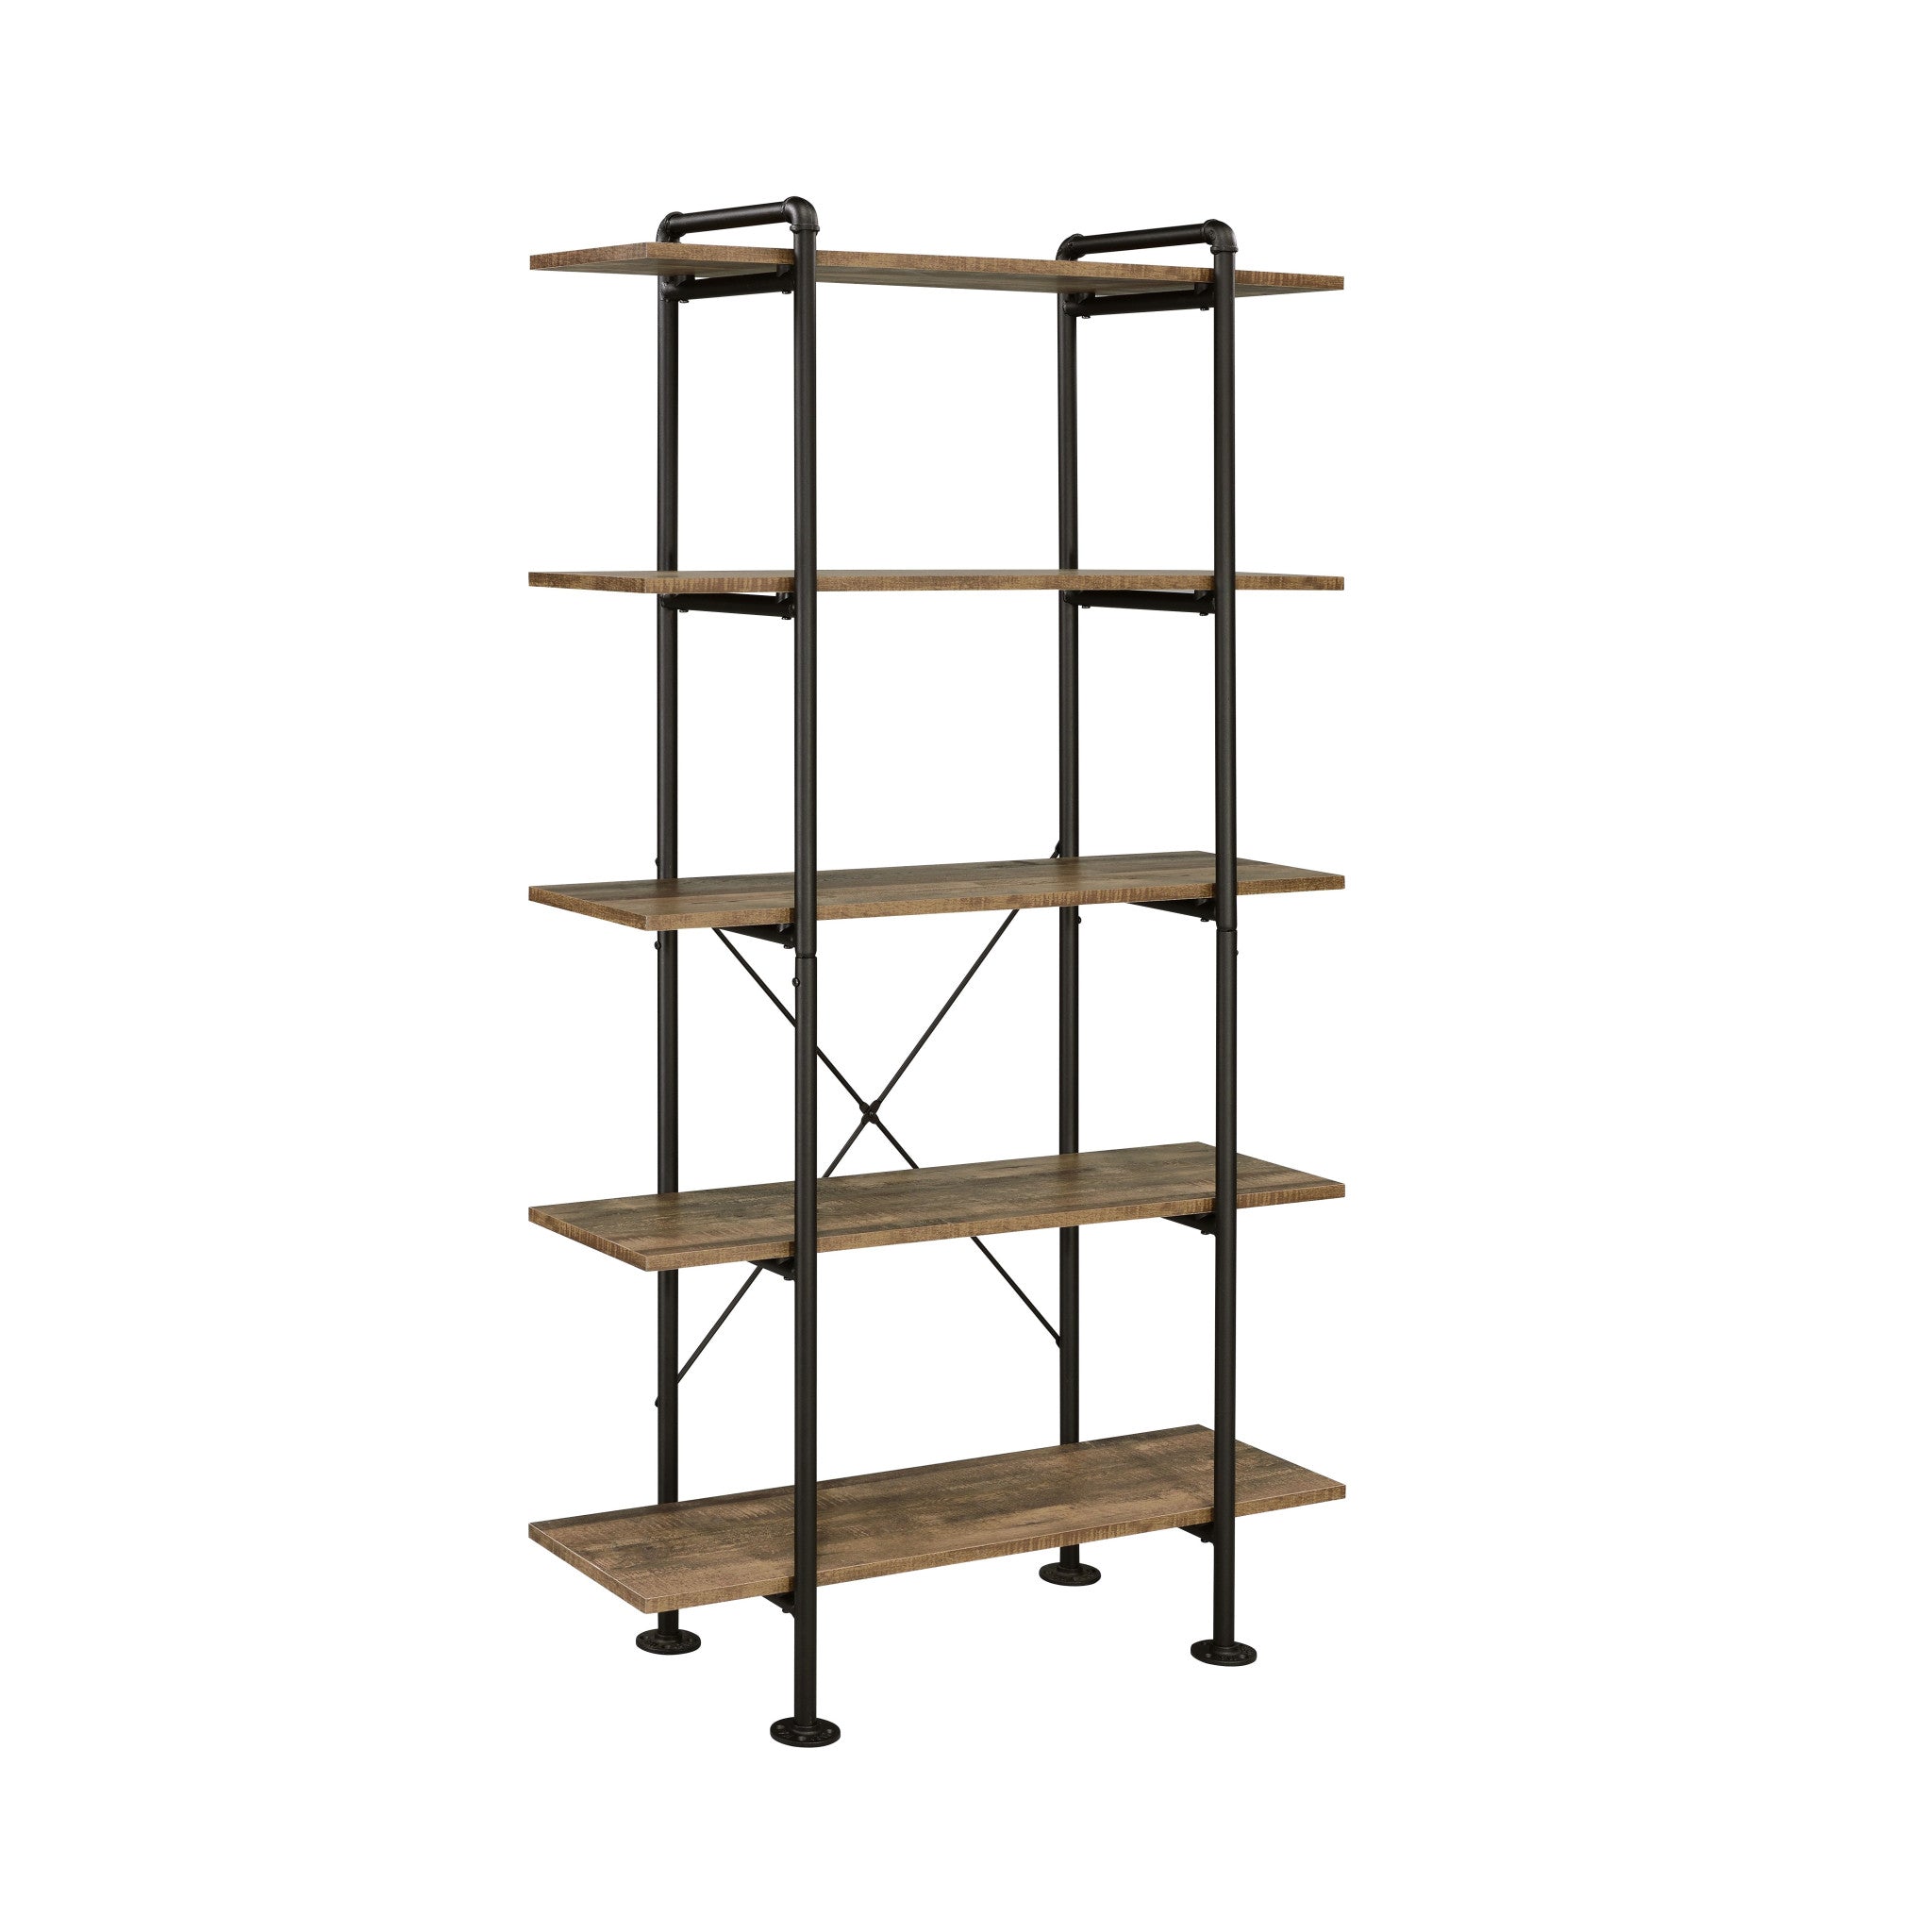 73" Brown and Black Metal Five Tier Etagere Bookcase